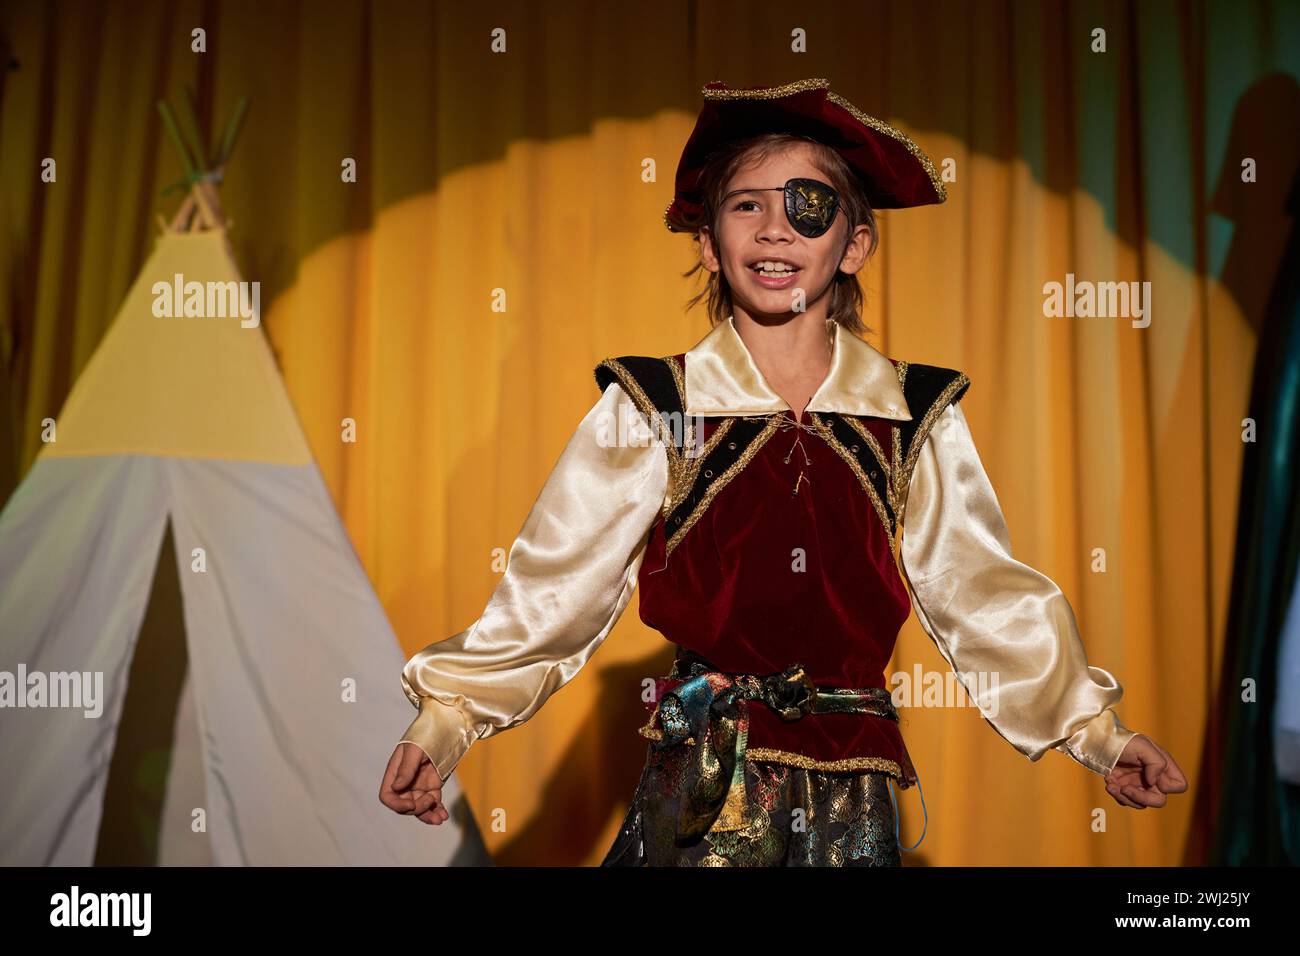 Waist up portrait of young boy wearing pirate costume performing on stage in school play Stock Photo